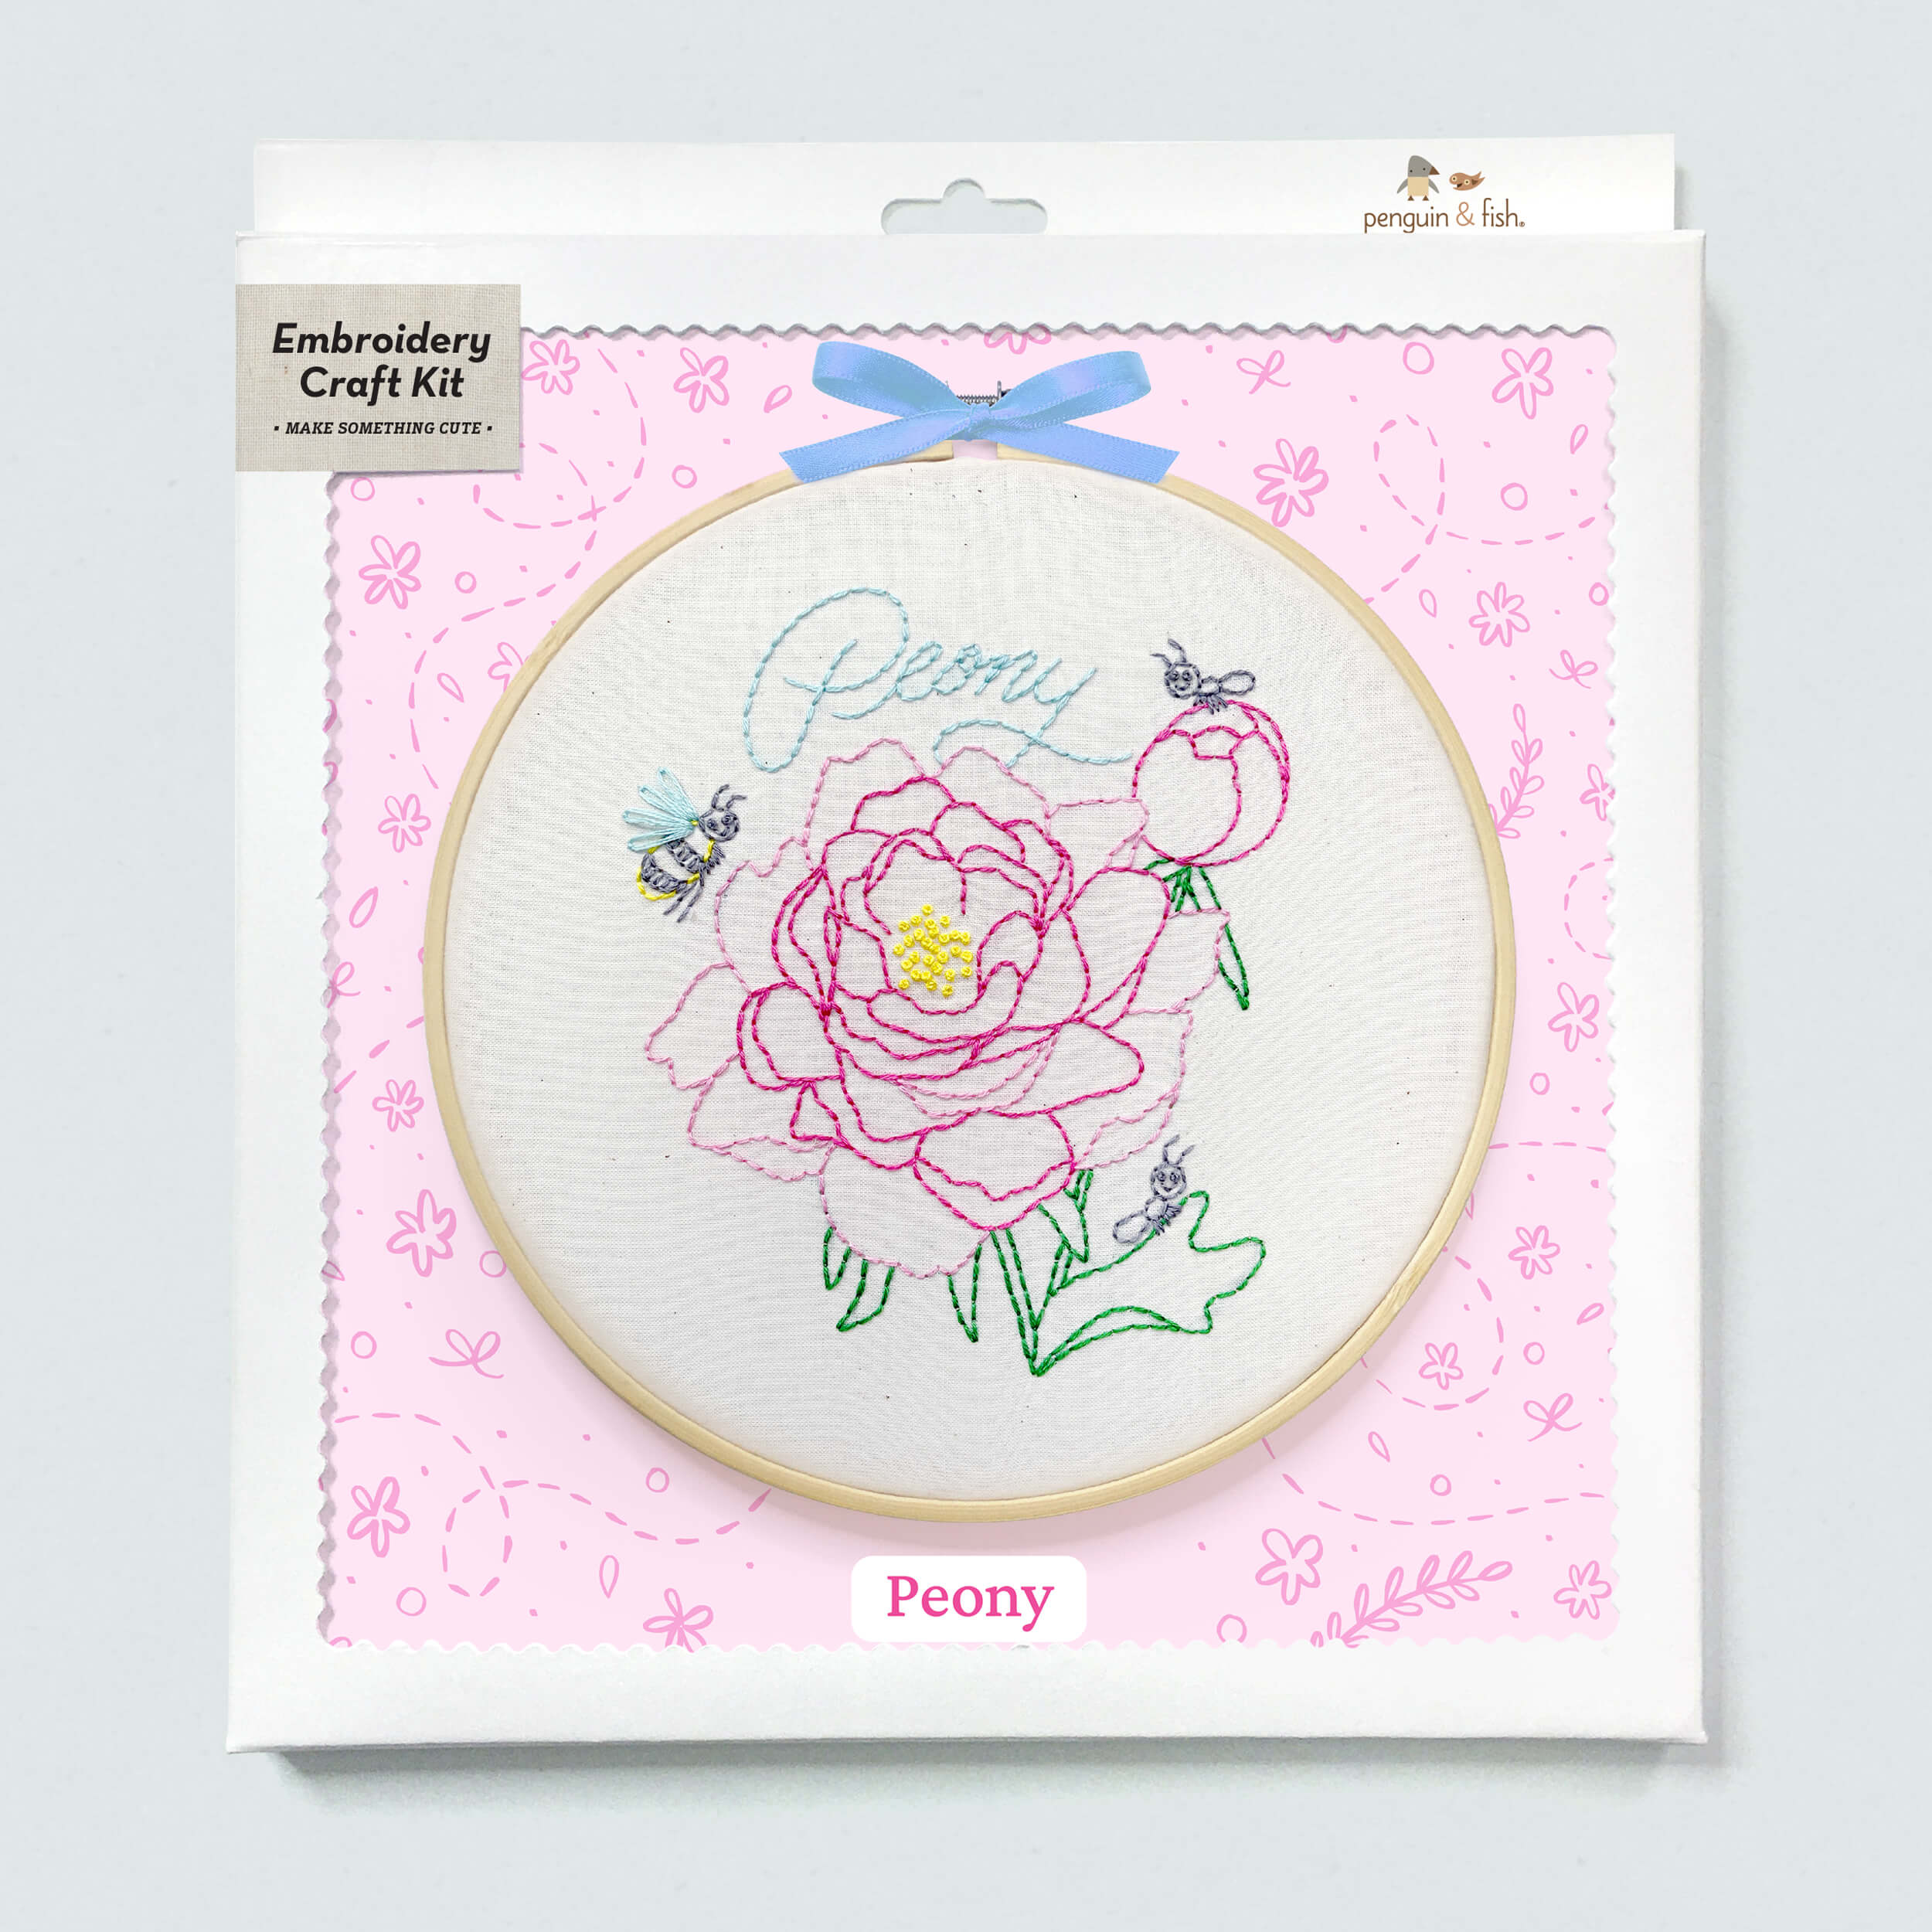 Peony embroidery kit in a box